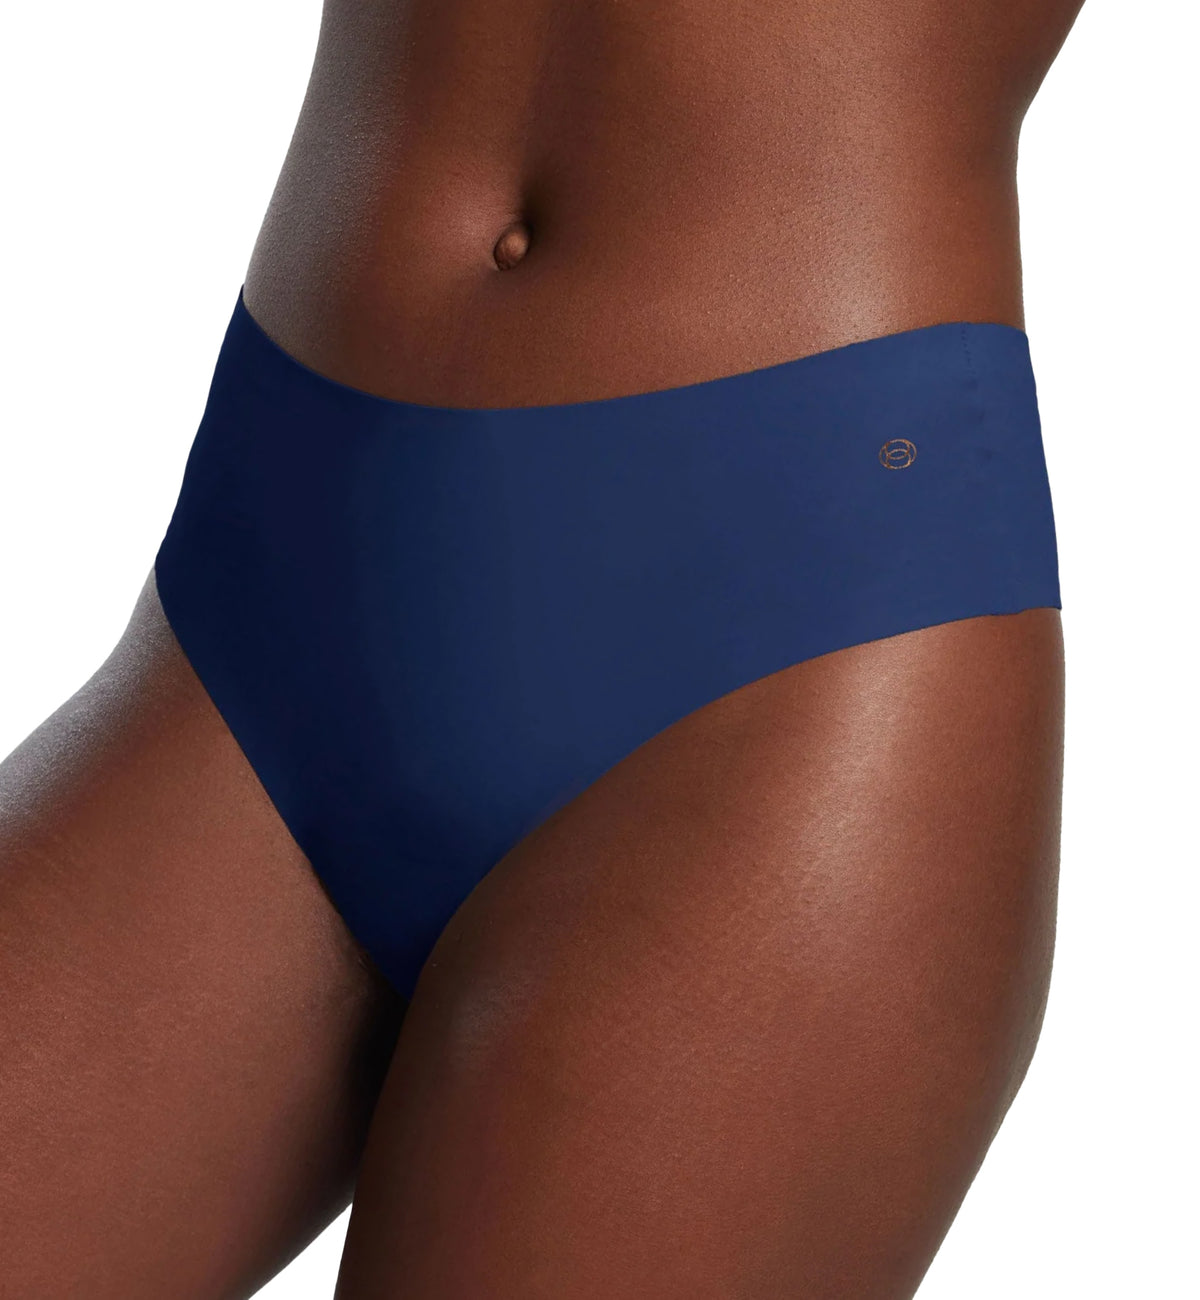 Evelyn &amp; Bobbie High-Waisted Thong (1703/1709),US 0-14,Midnight Navy - Midnight Navy,US 0 - 14